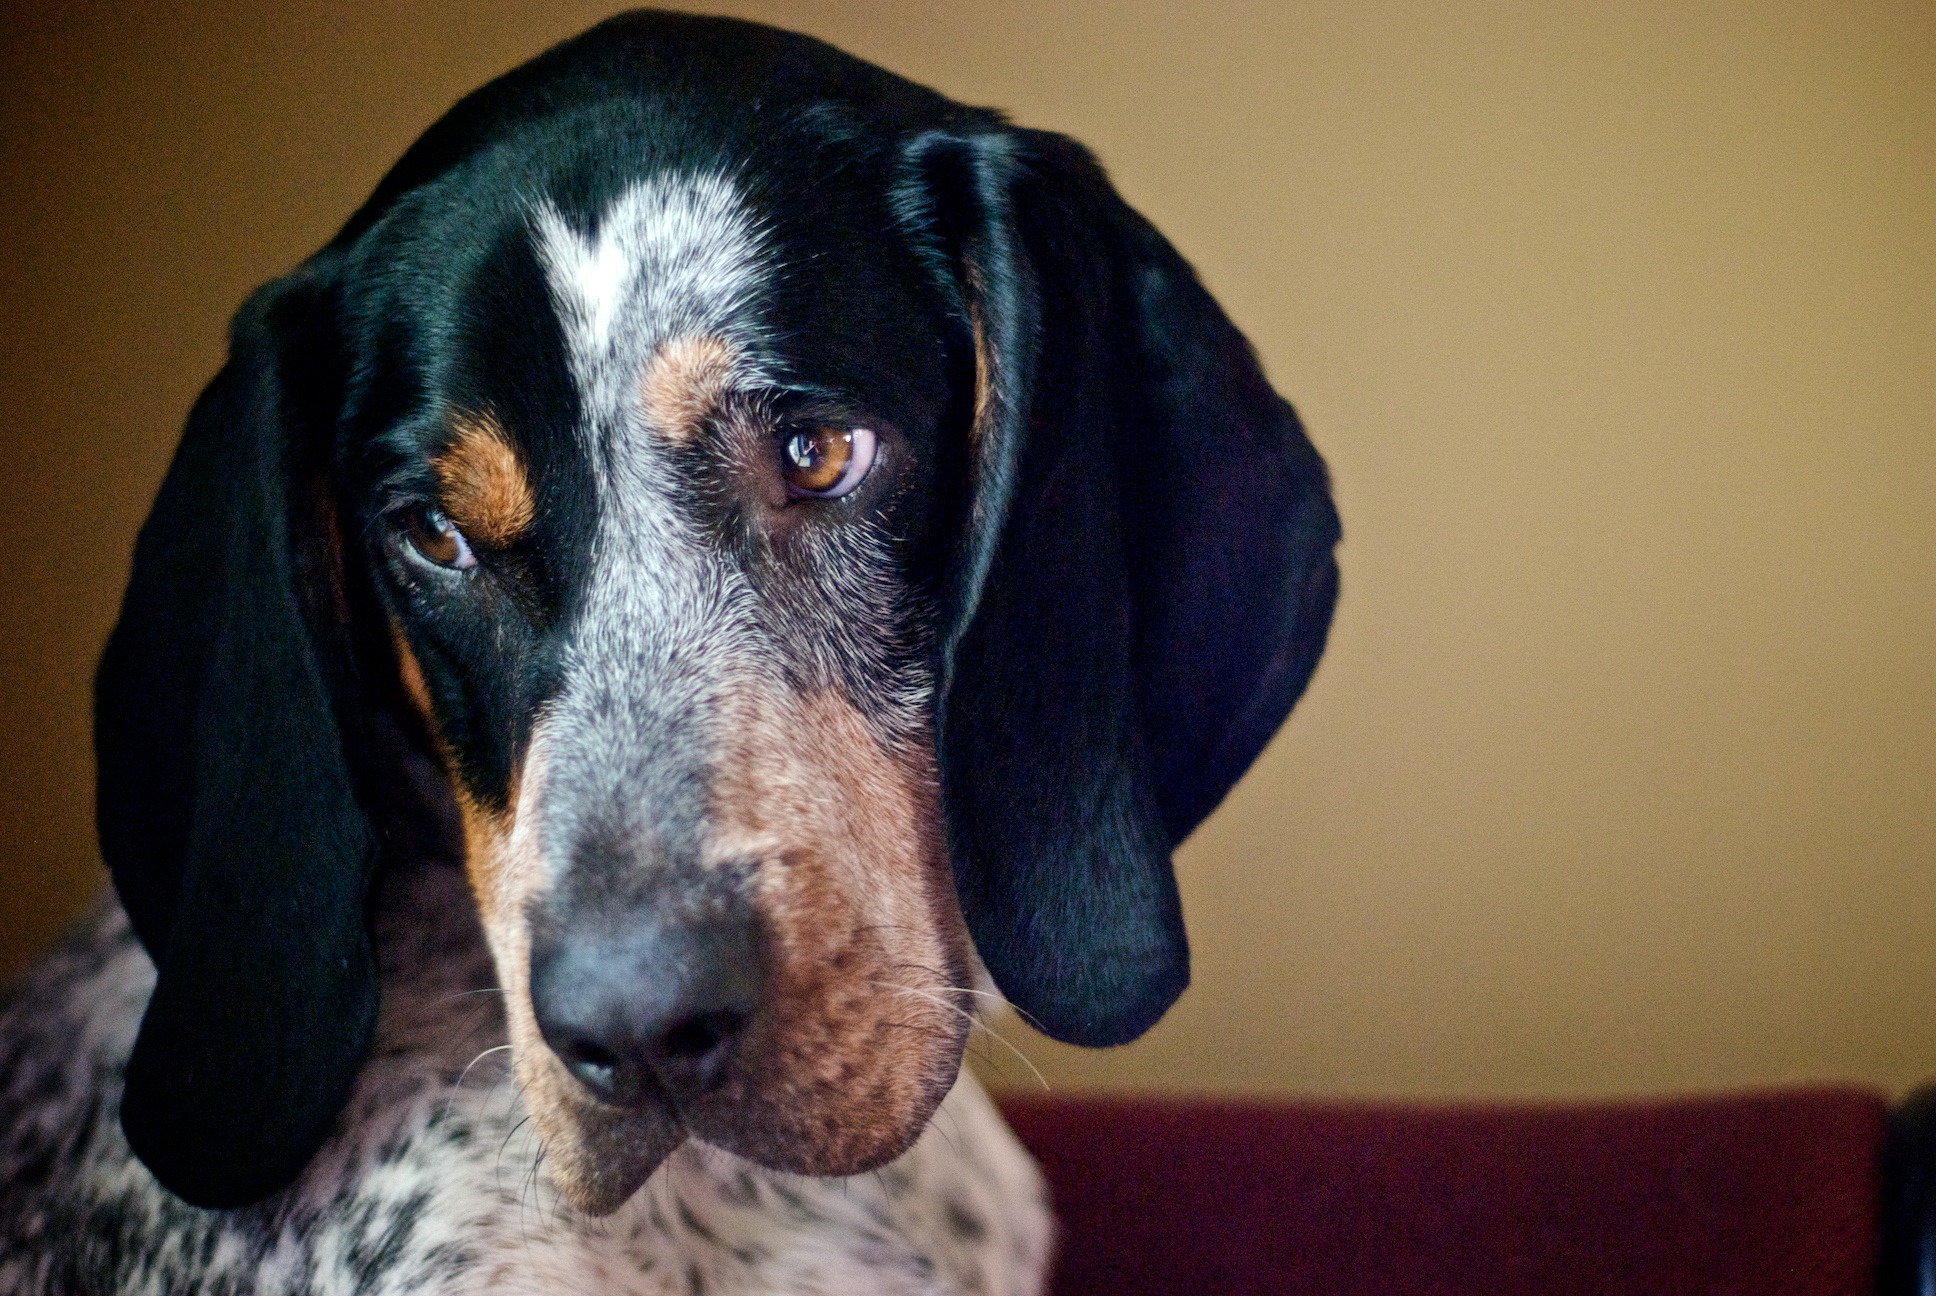 Bluetick Coonhound pictures gallery, Cute Bluetick Coonhound pictures, Bluetick Coonhound wallpapers, Bluetick Coonhound photo gallery, Grey Bluetick Coonhound pictures